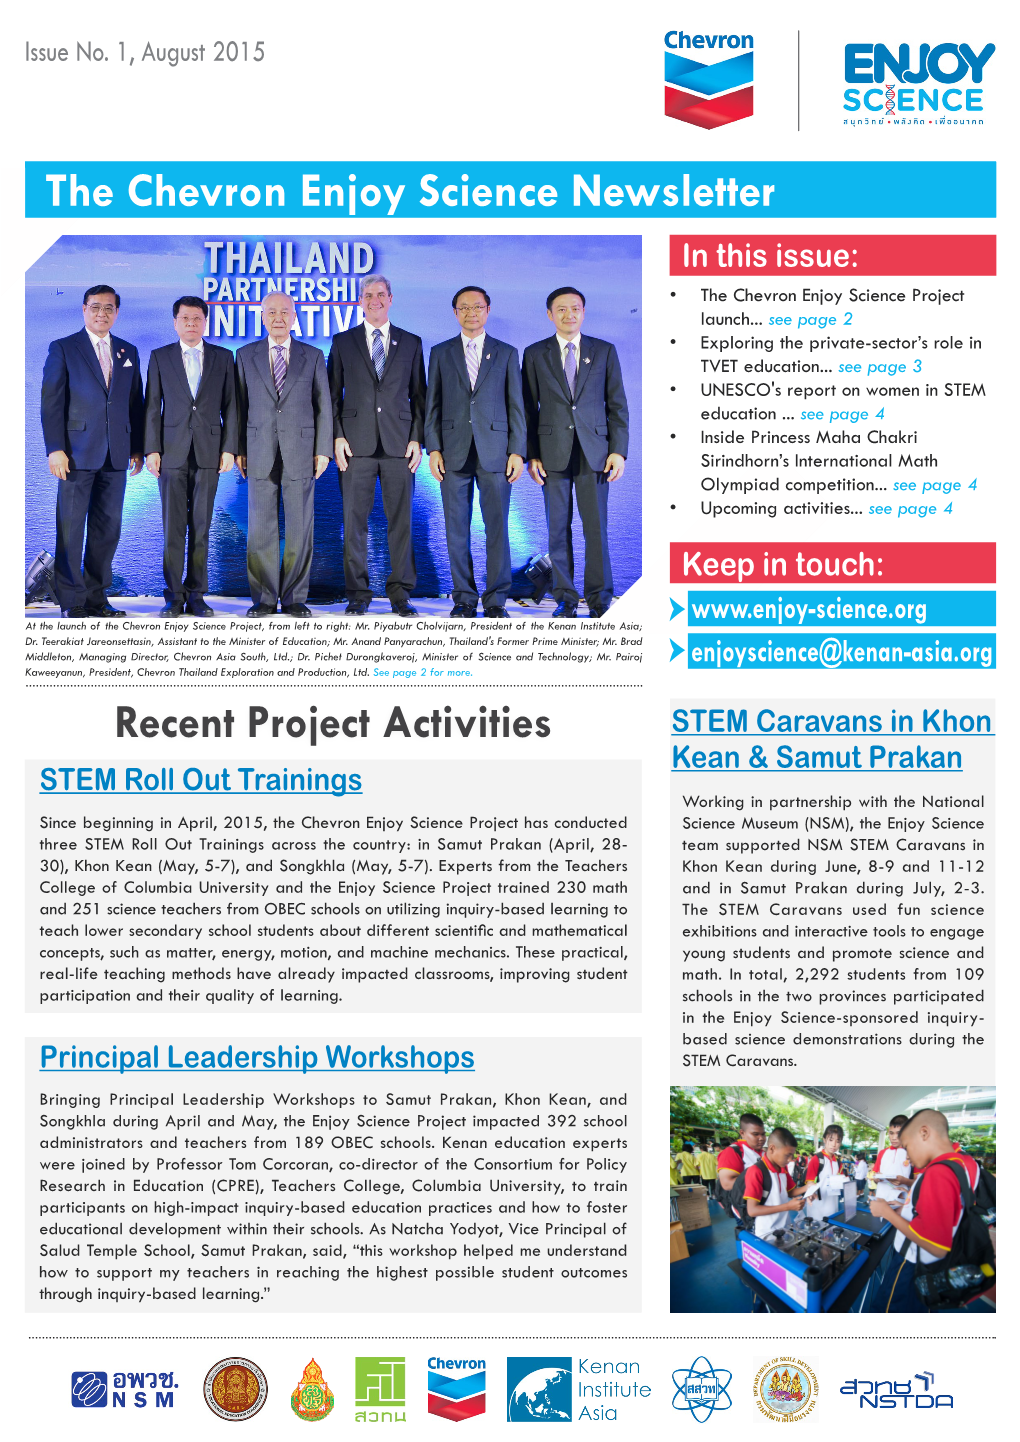 The Chevron Enjoy Science Newsletter in This Issue: • the Chevron Enjoy Science Project Launch